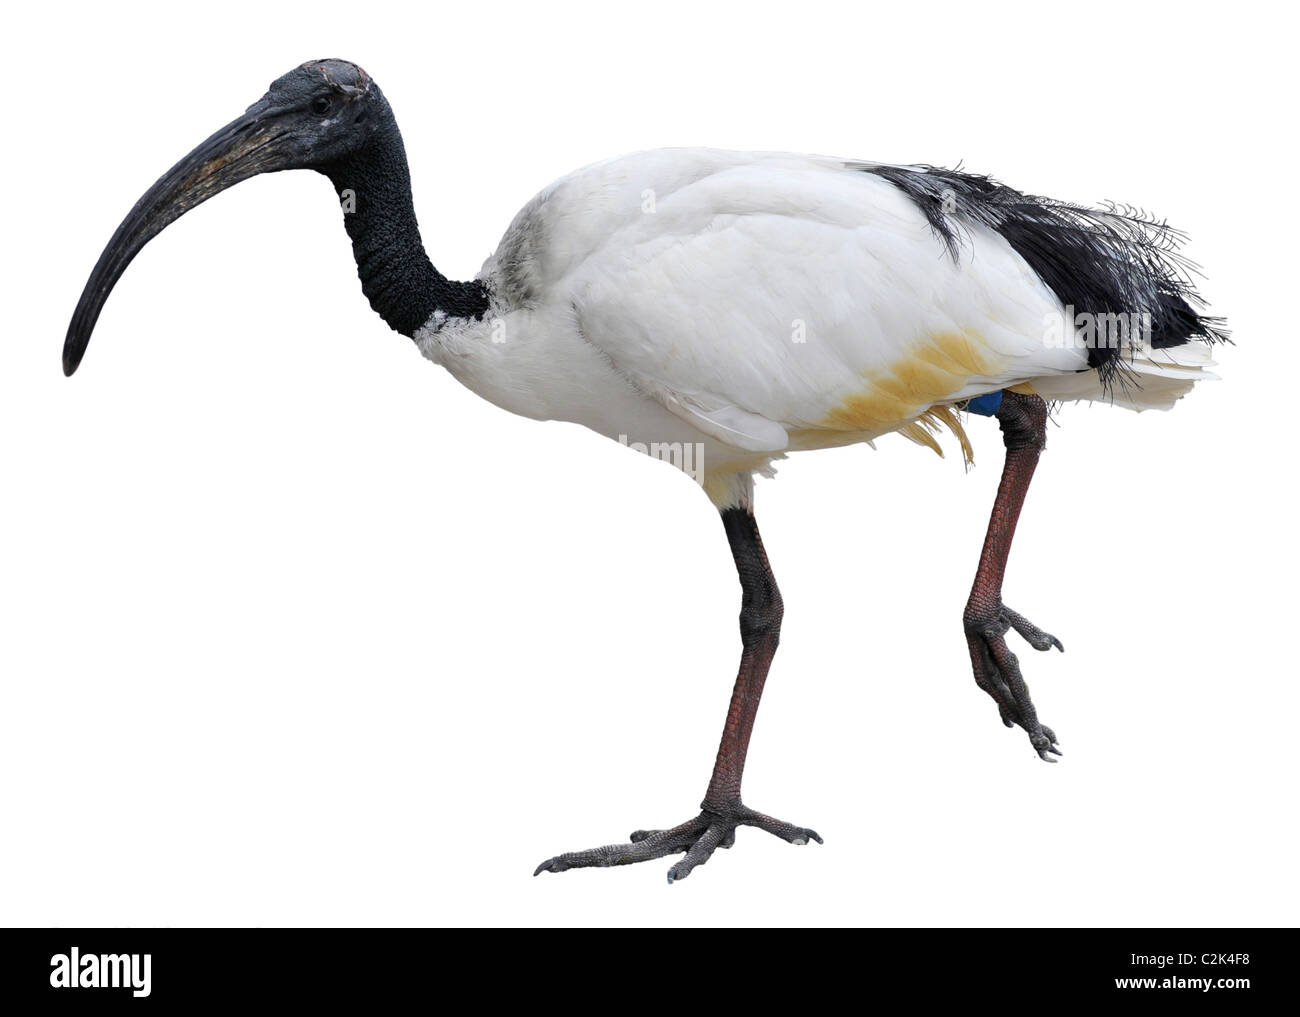 African sacred ibis (Threskiornis aethiopicus), view of profile and walking, isolated on white background Stock Photo